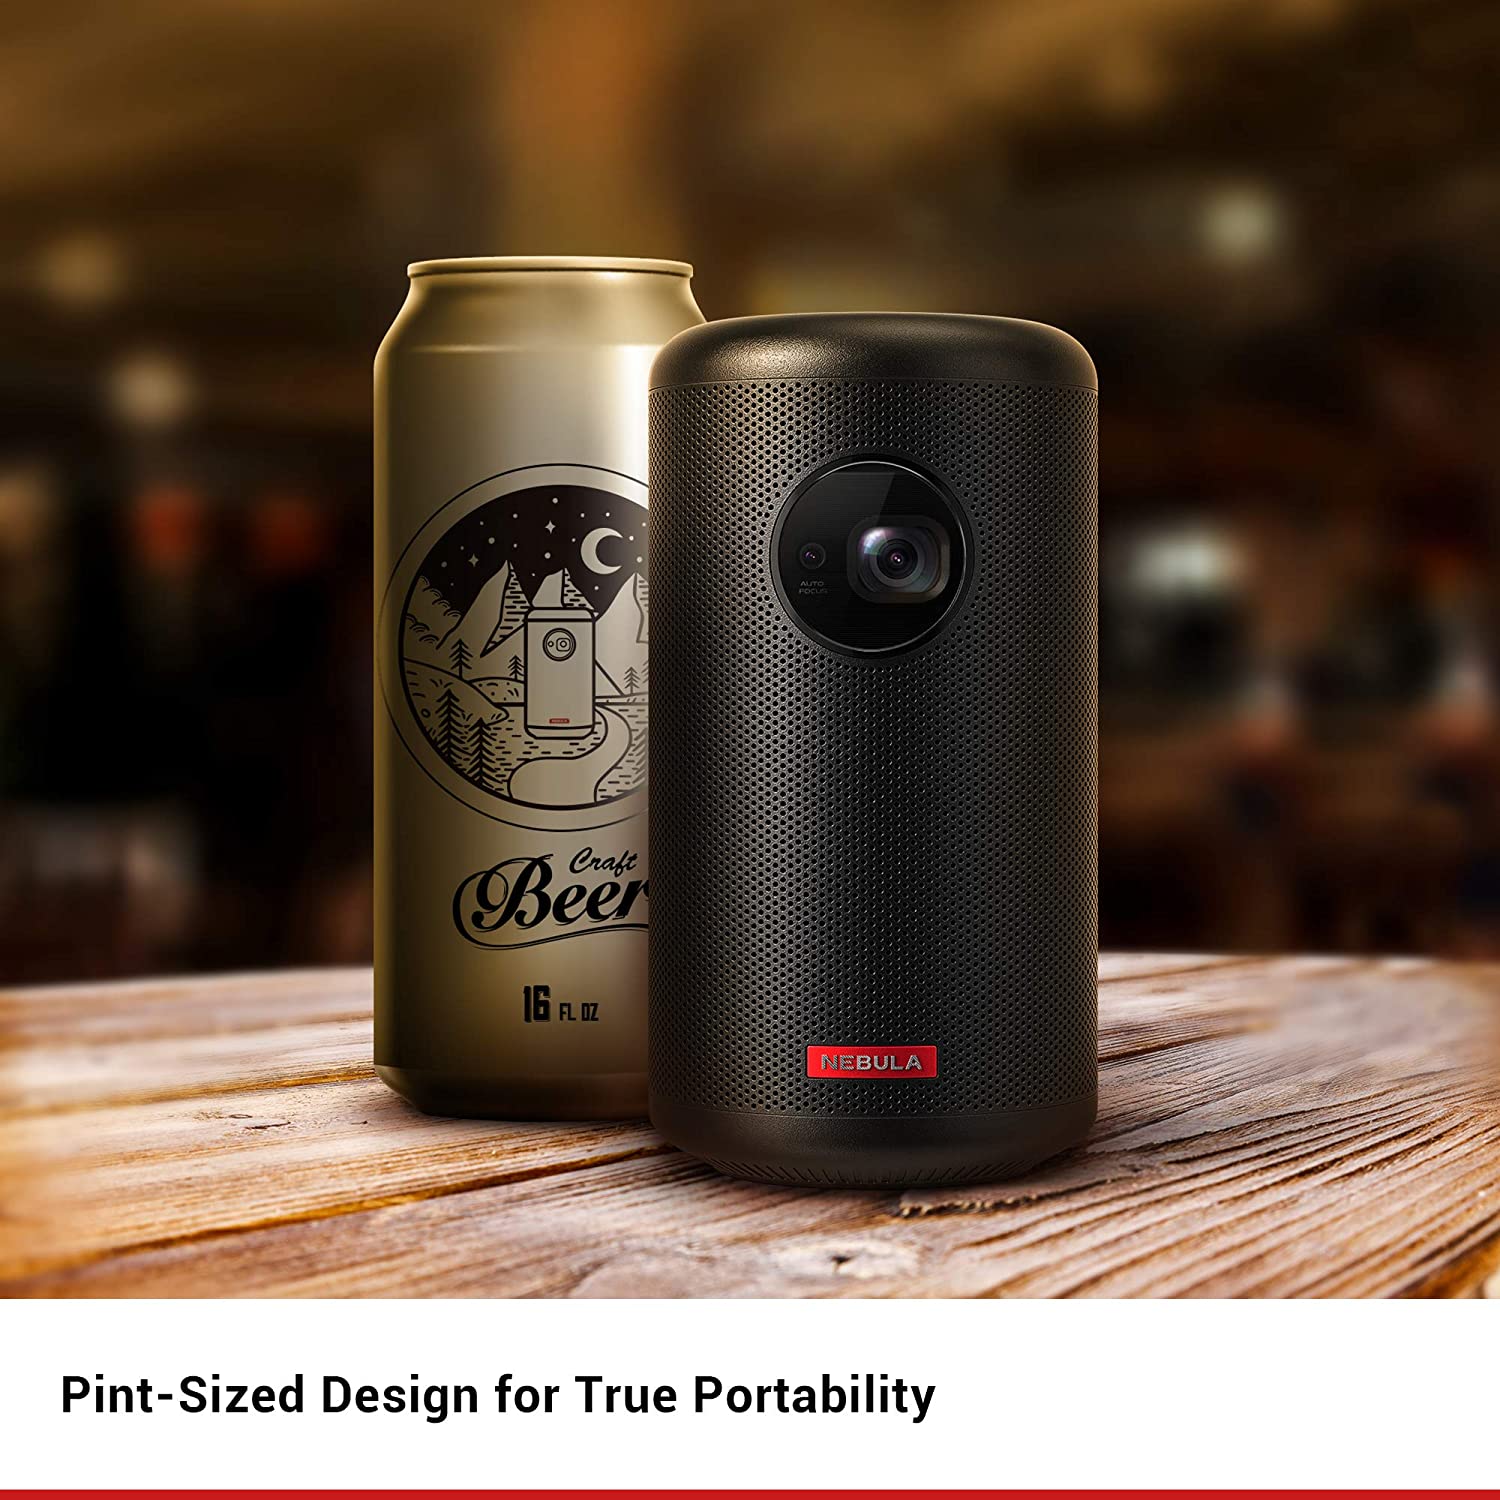 A Nebula Capsule II portable projector sits on a wooden table next to a can of beer.